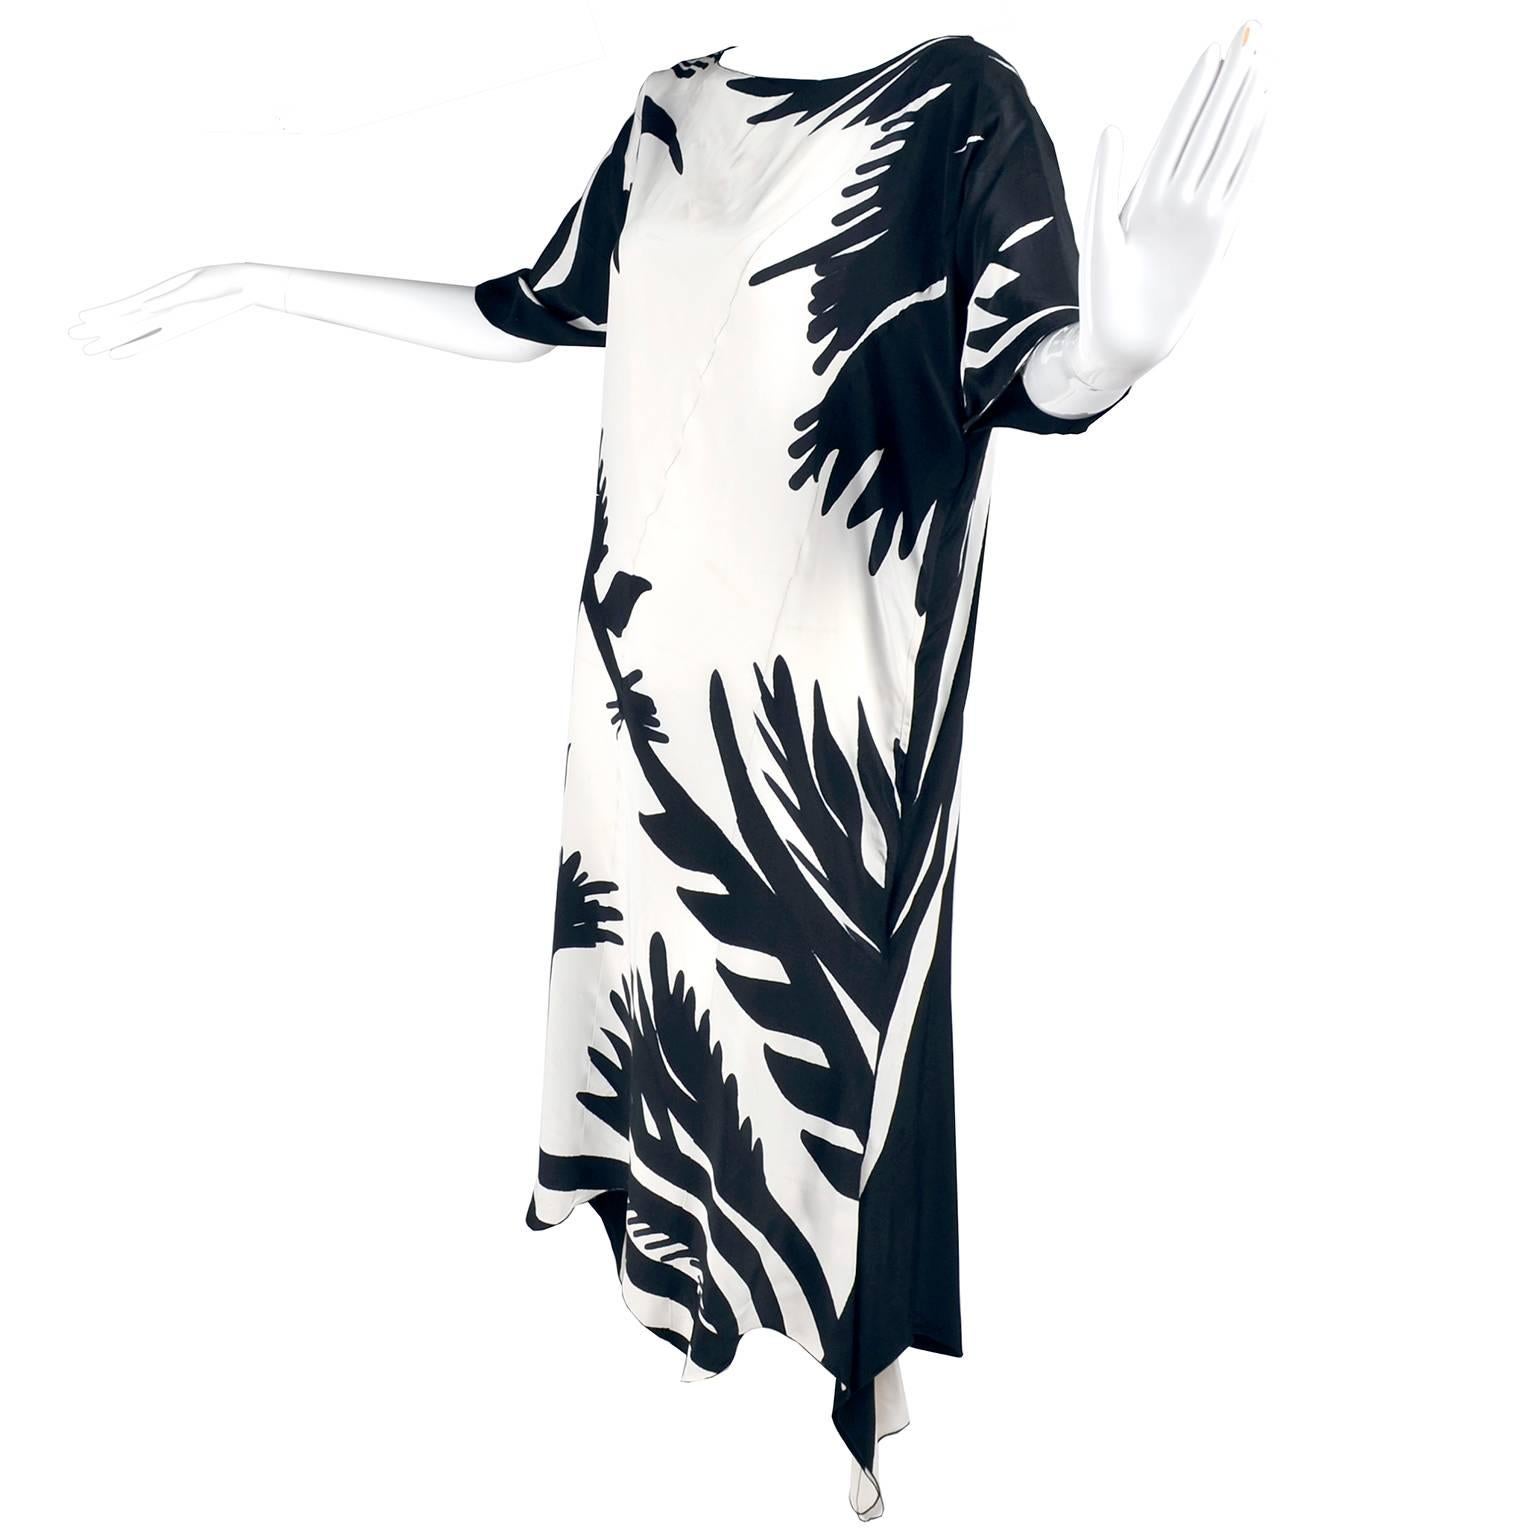 We acquired this gorgeous caftan from an estate of very high end designer pieces from the 1970's and 1980's.  This piece no longer has a label but is beautifully made with exceptional details.  The dress is black with white on the back and white